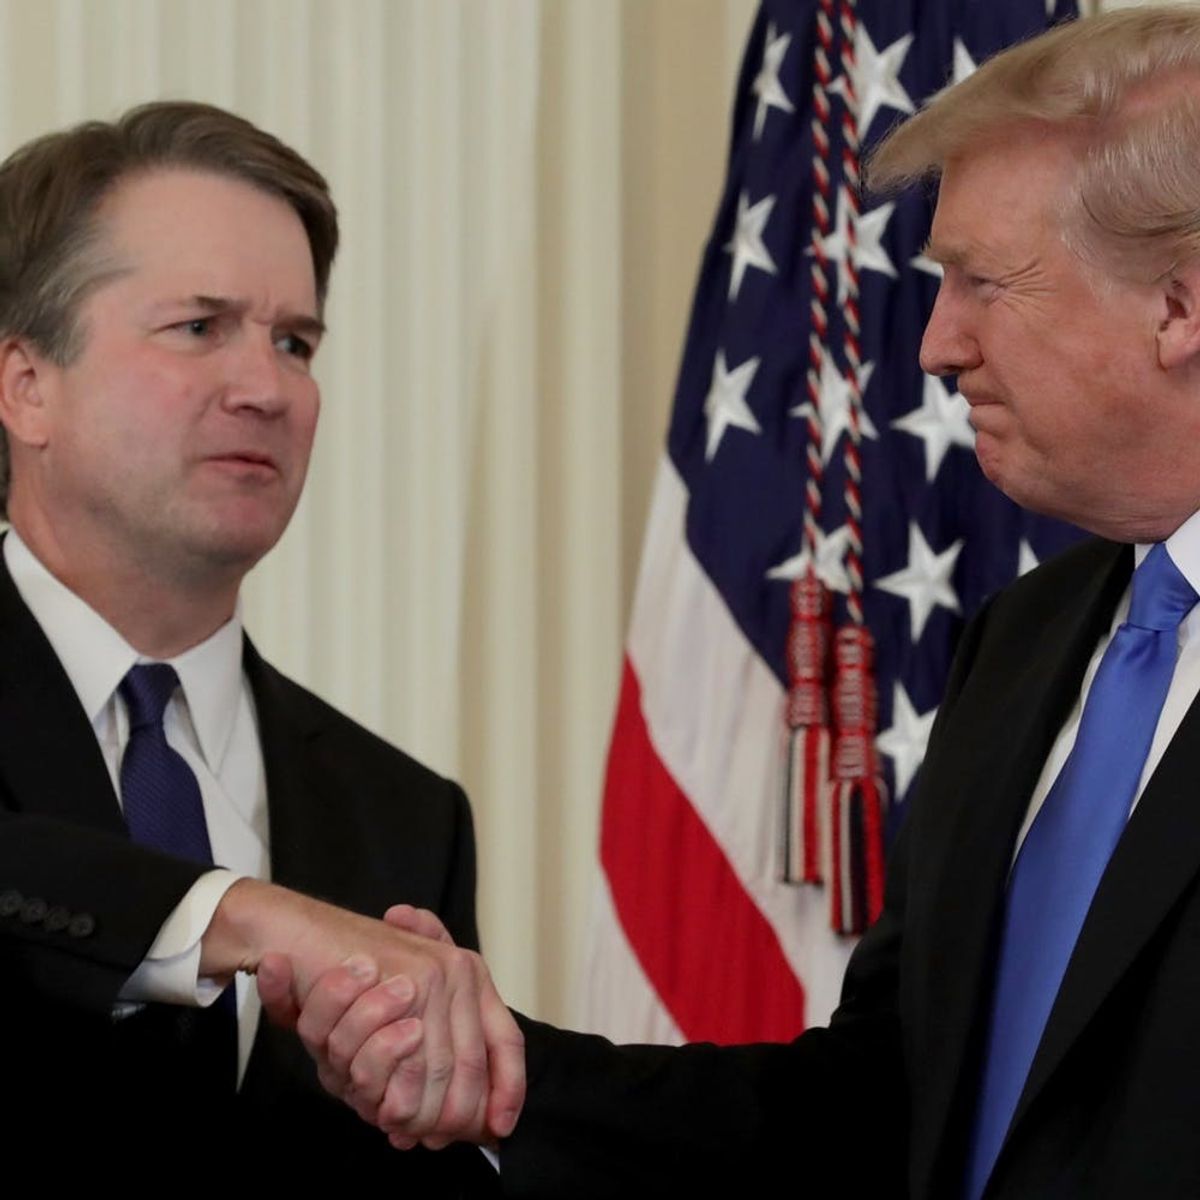 What to Know About Brett Kavanaugh, Trump’s New SCOTUS Nominee